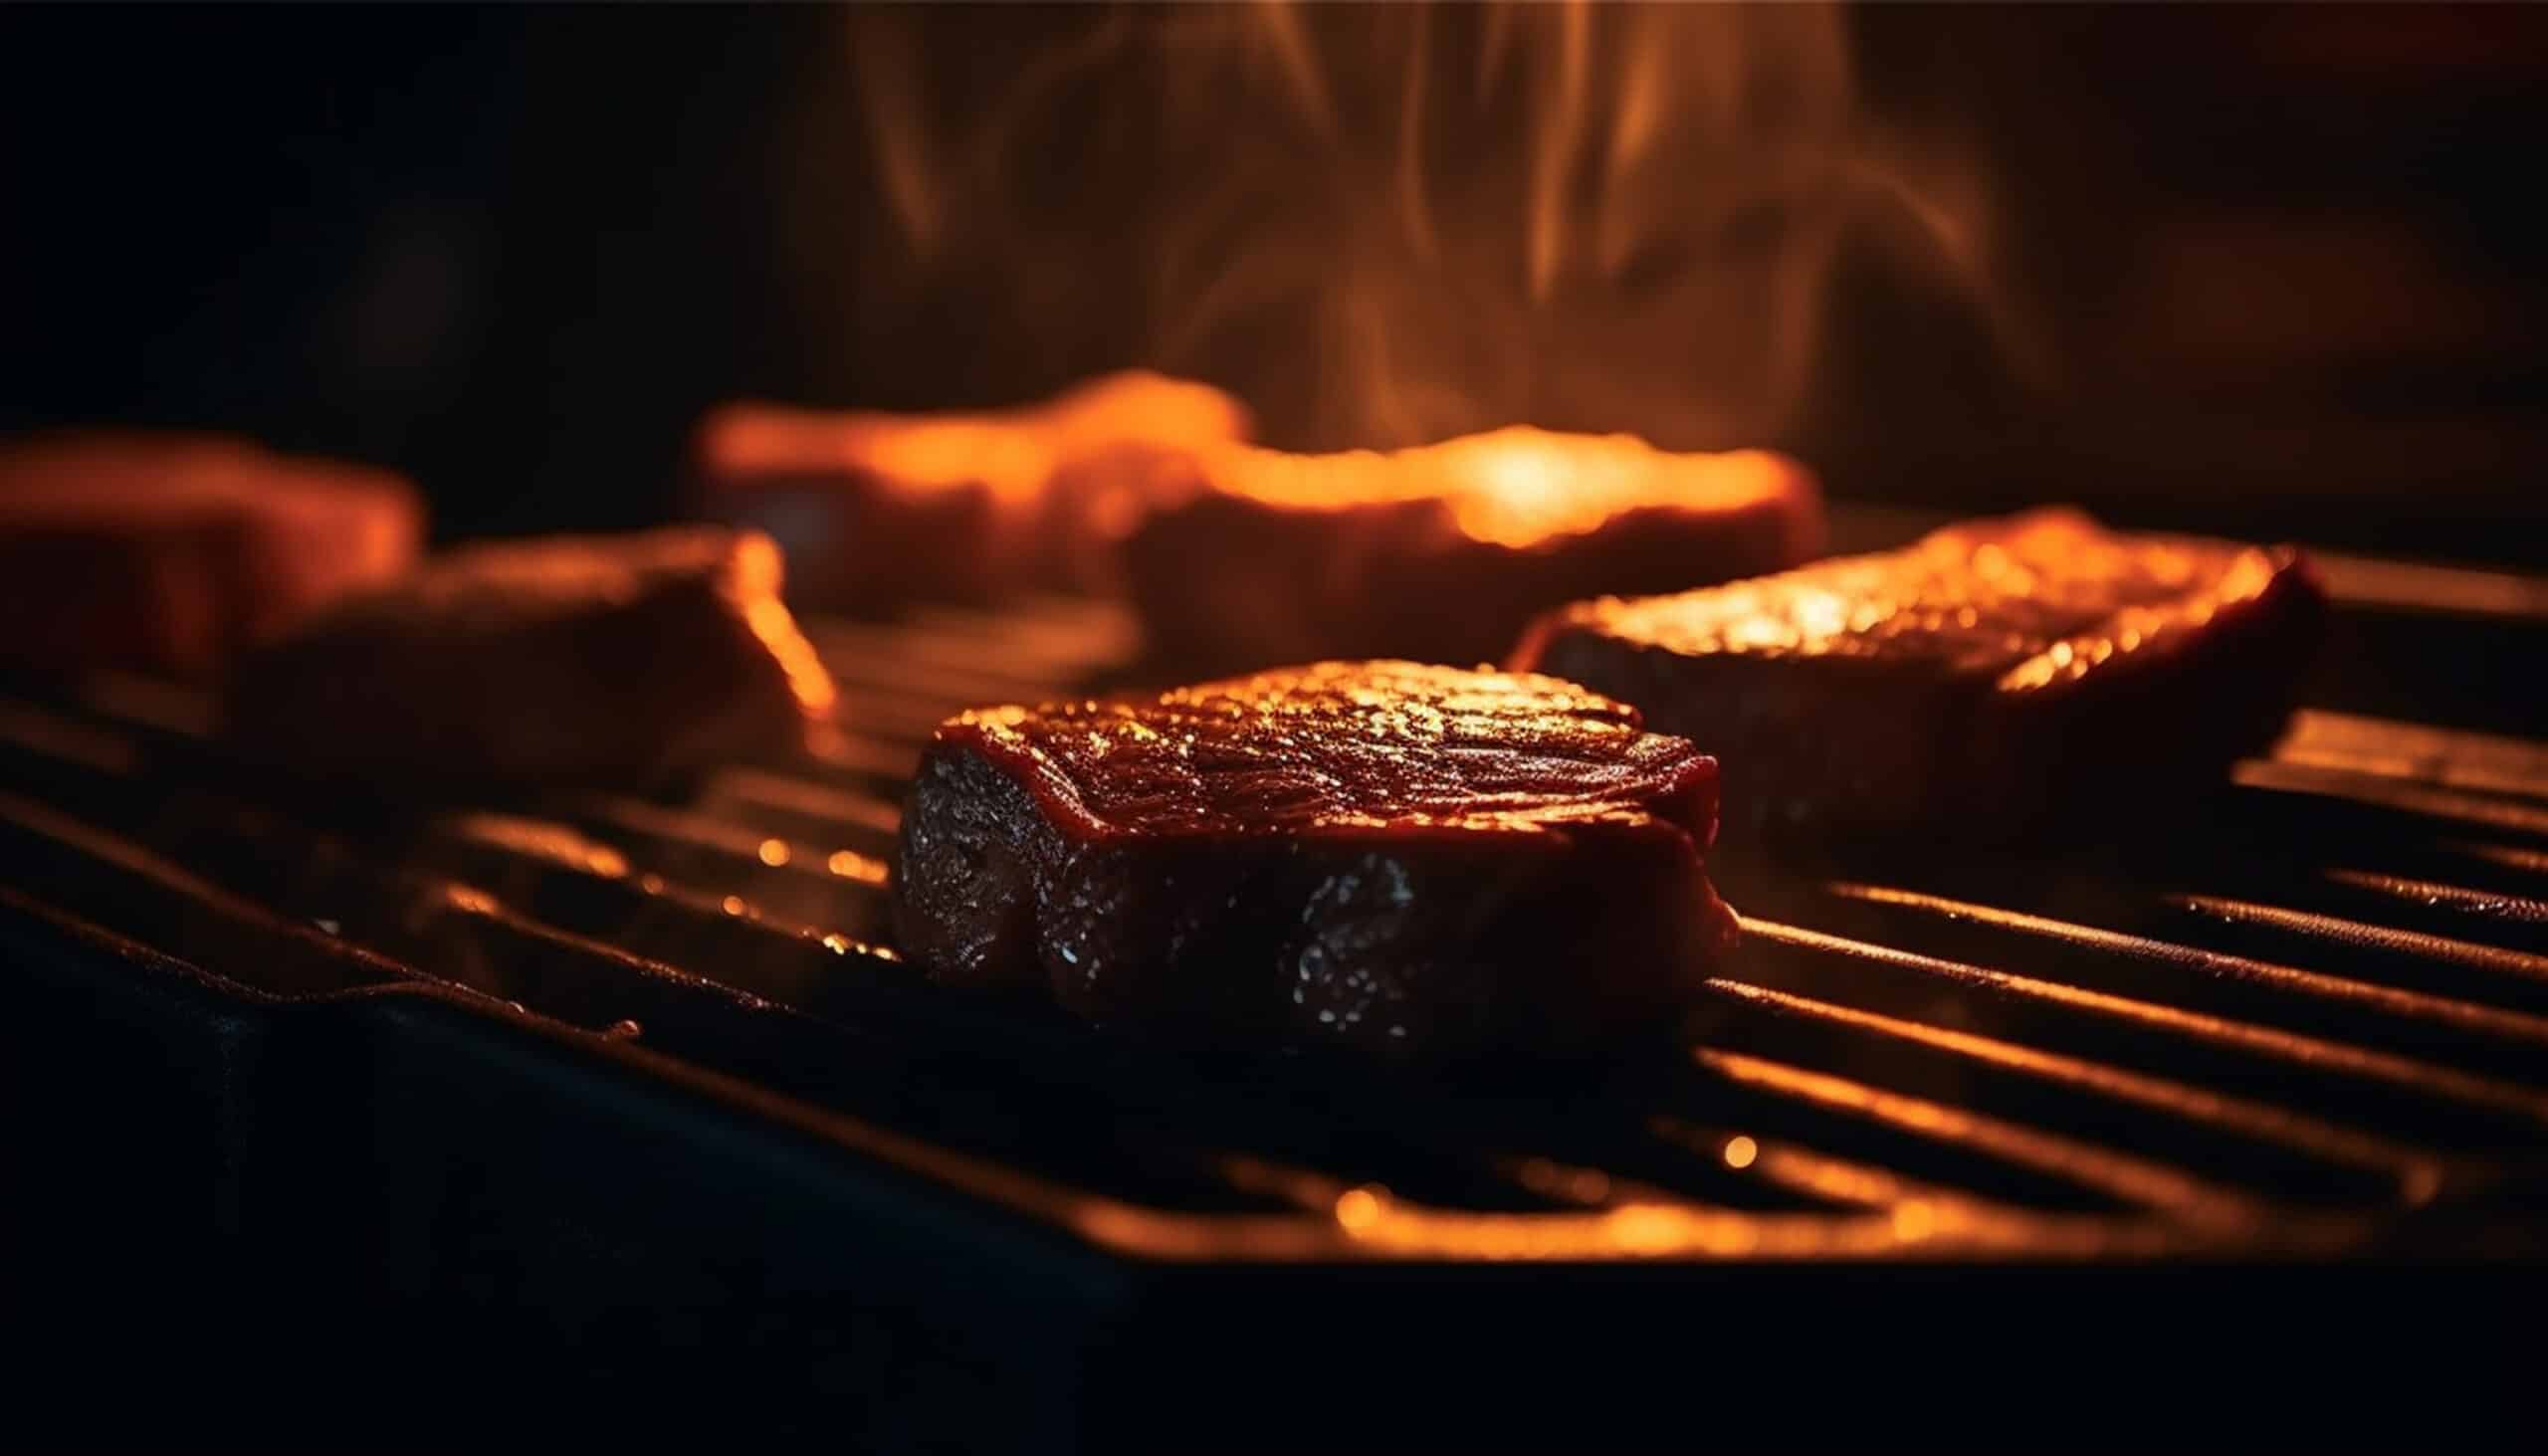 www.appr.com : How To Grill Steak On Gas Grill?